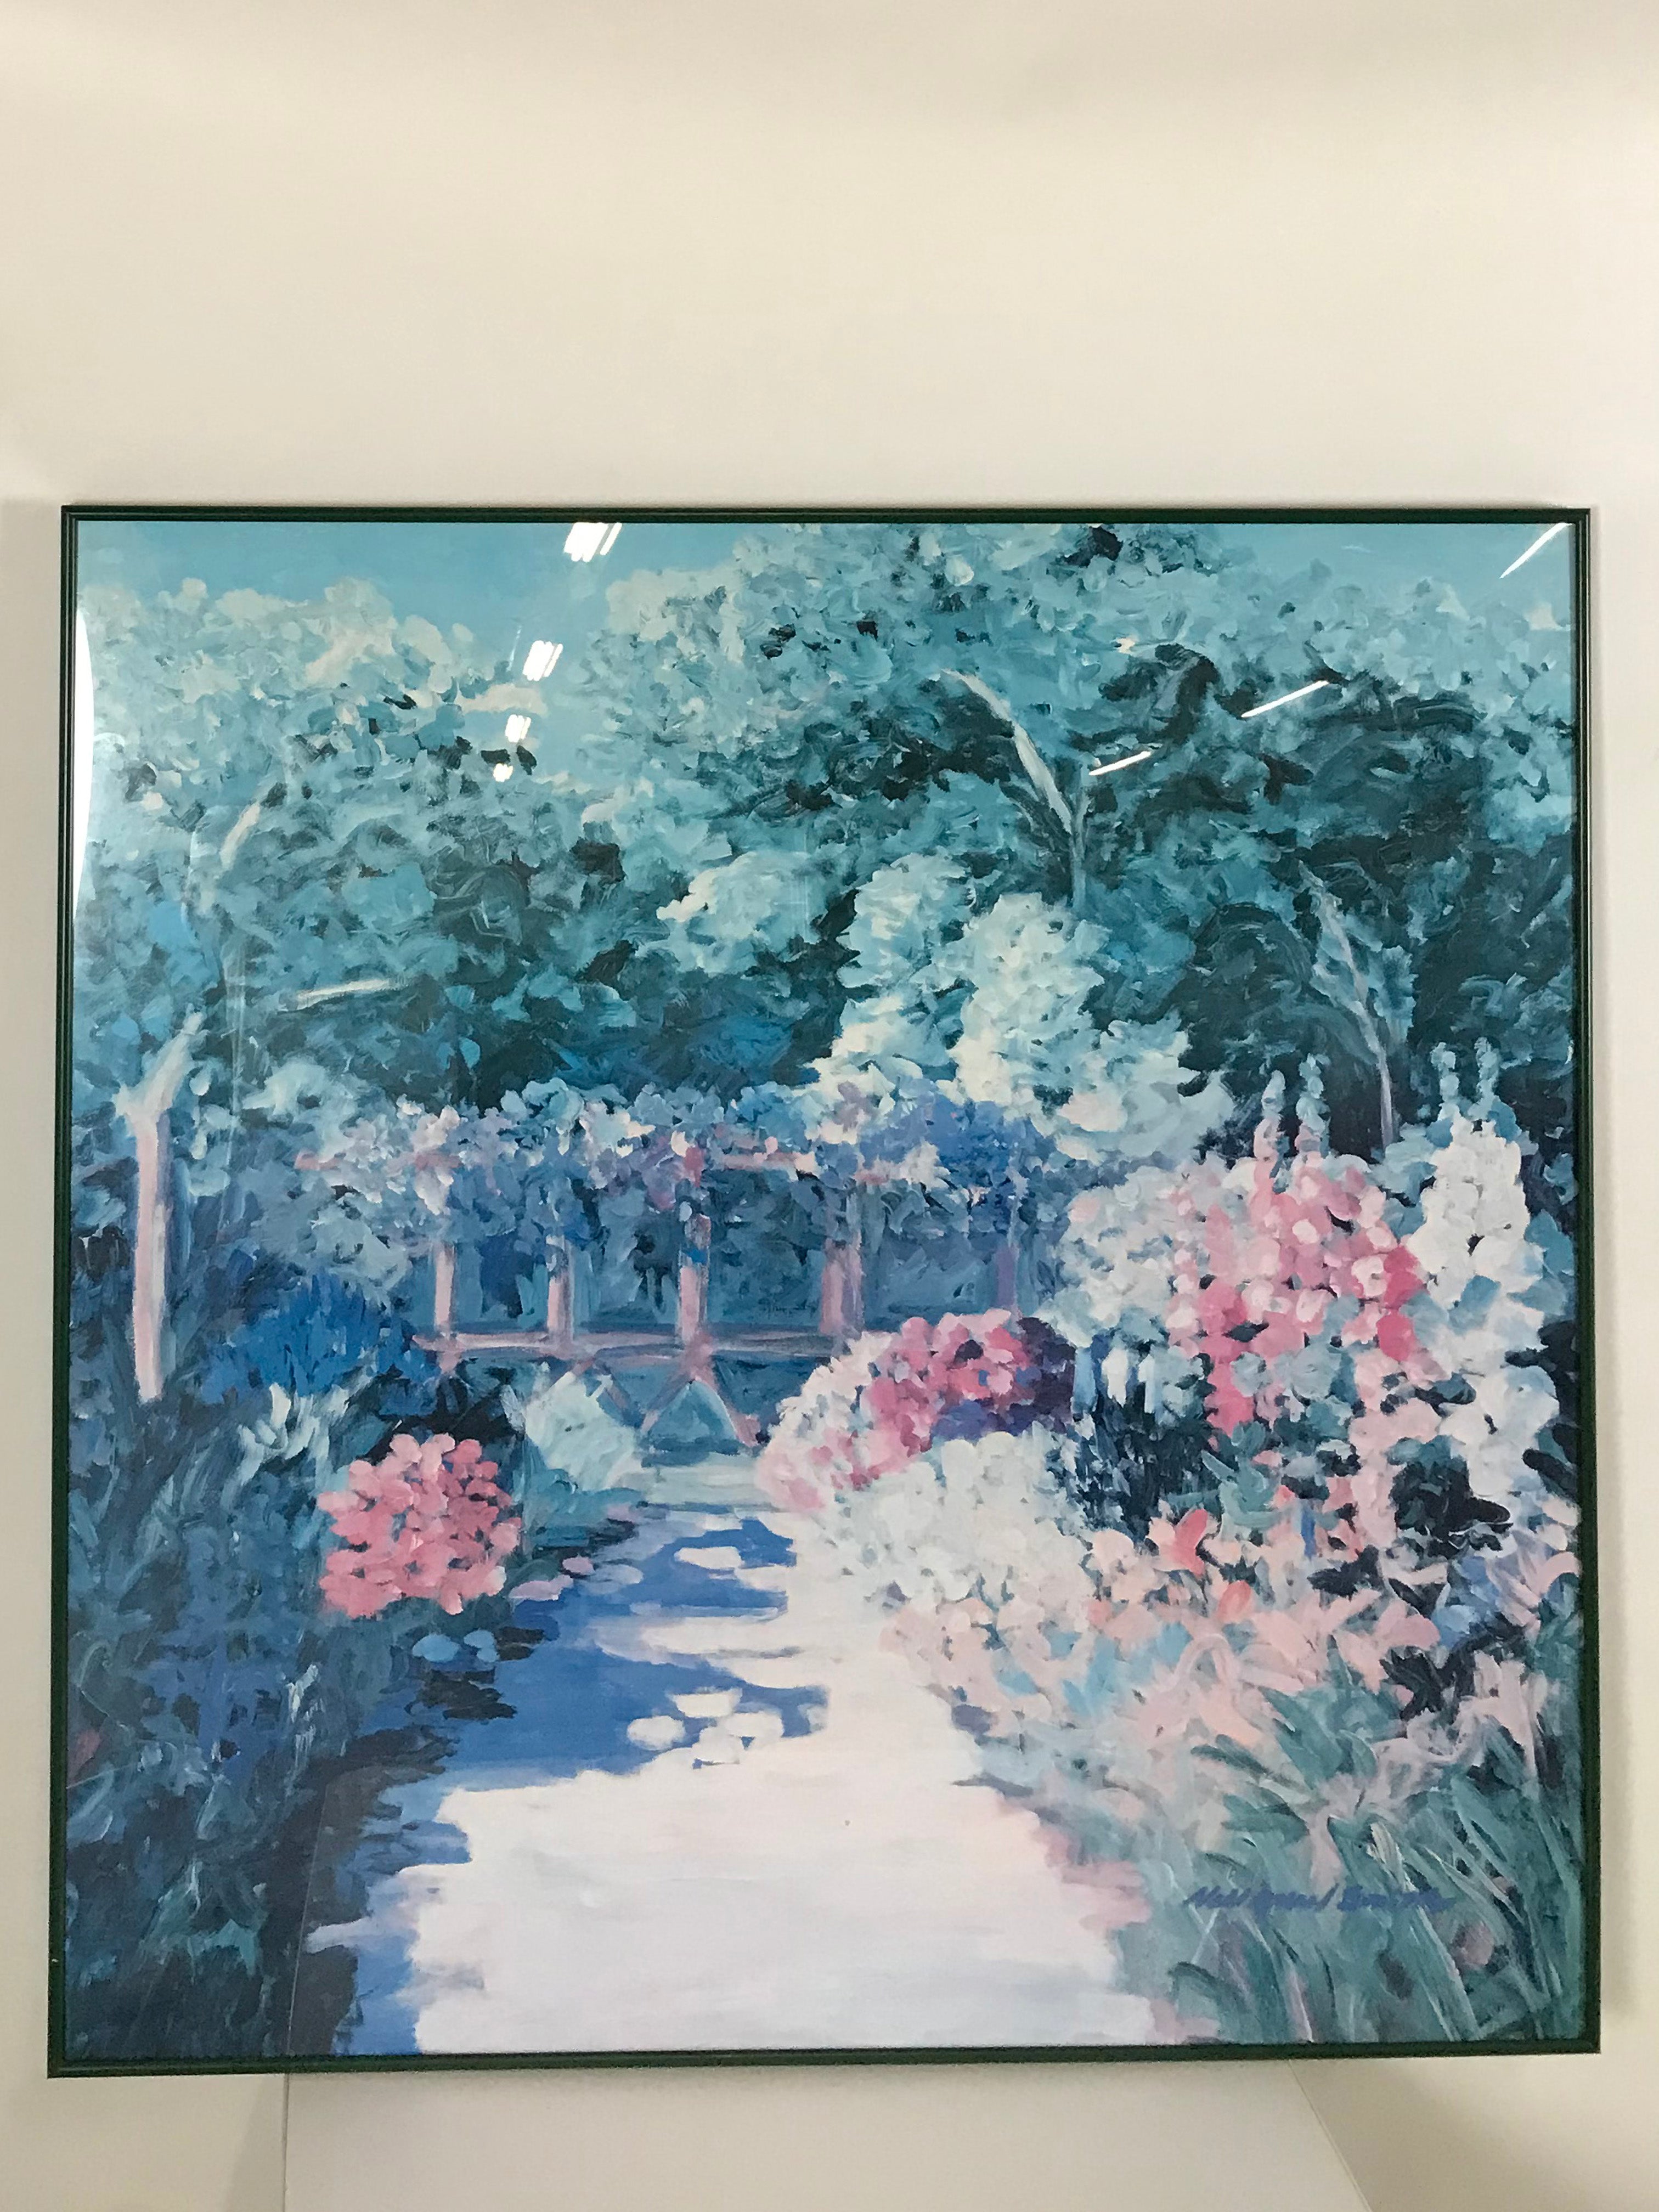 37x37 "Painting of Garden" in Green Picture Frame